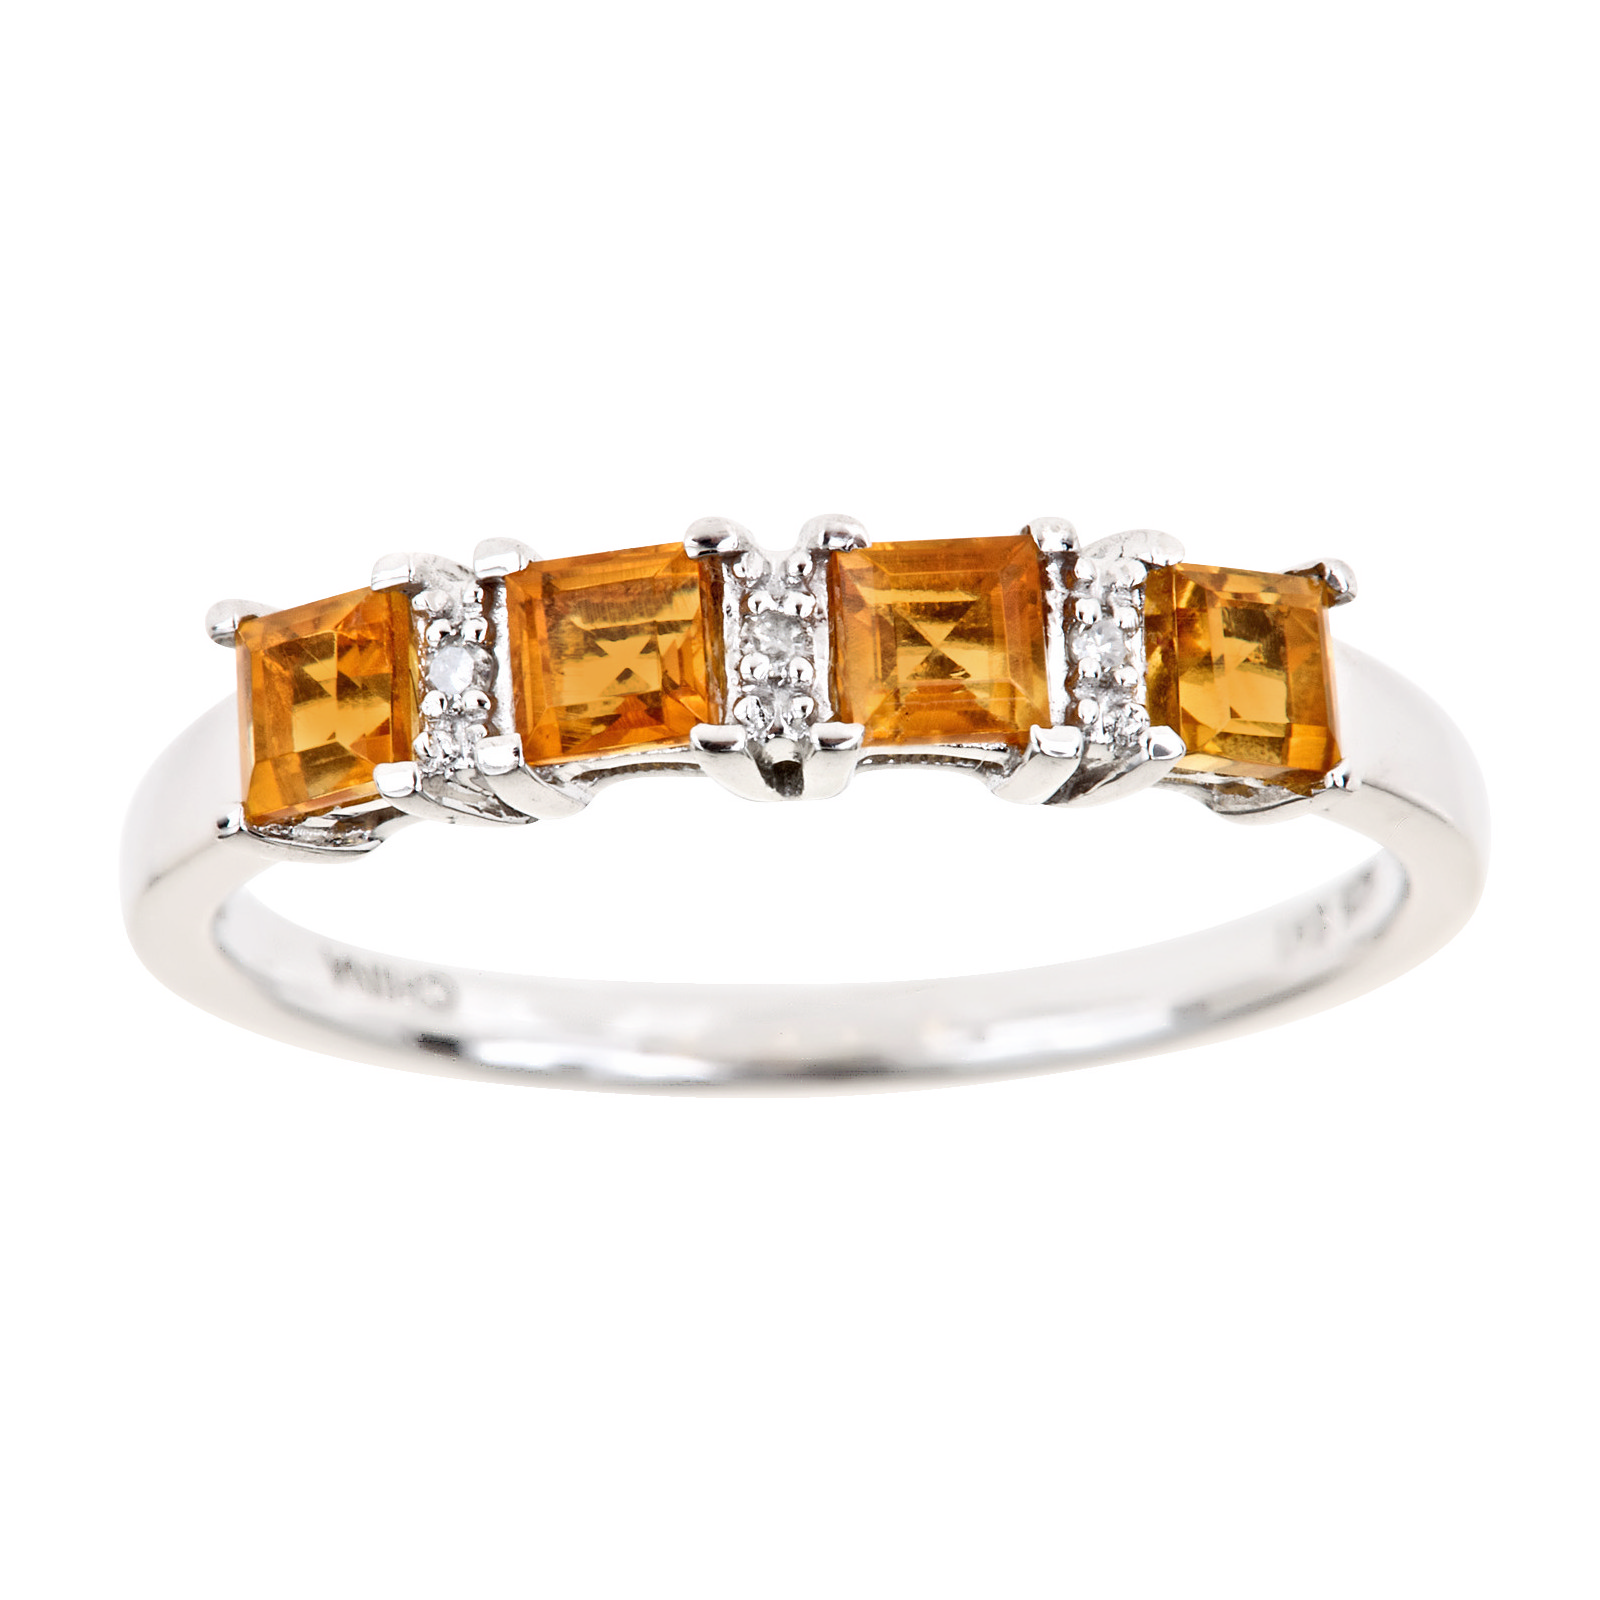 Ladies Sterling Silver 4 Stone Citrine and Diamond Accent Ring